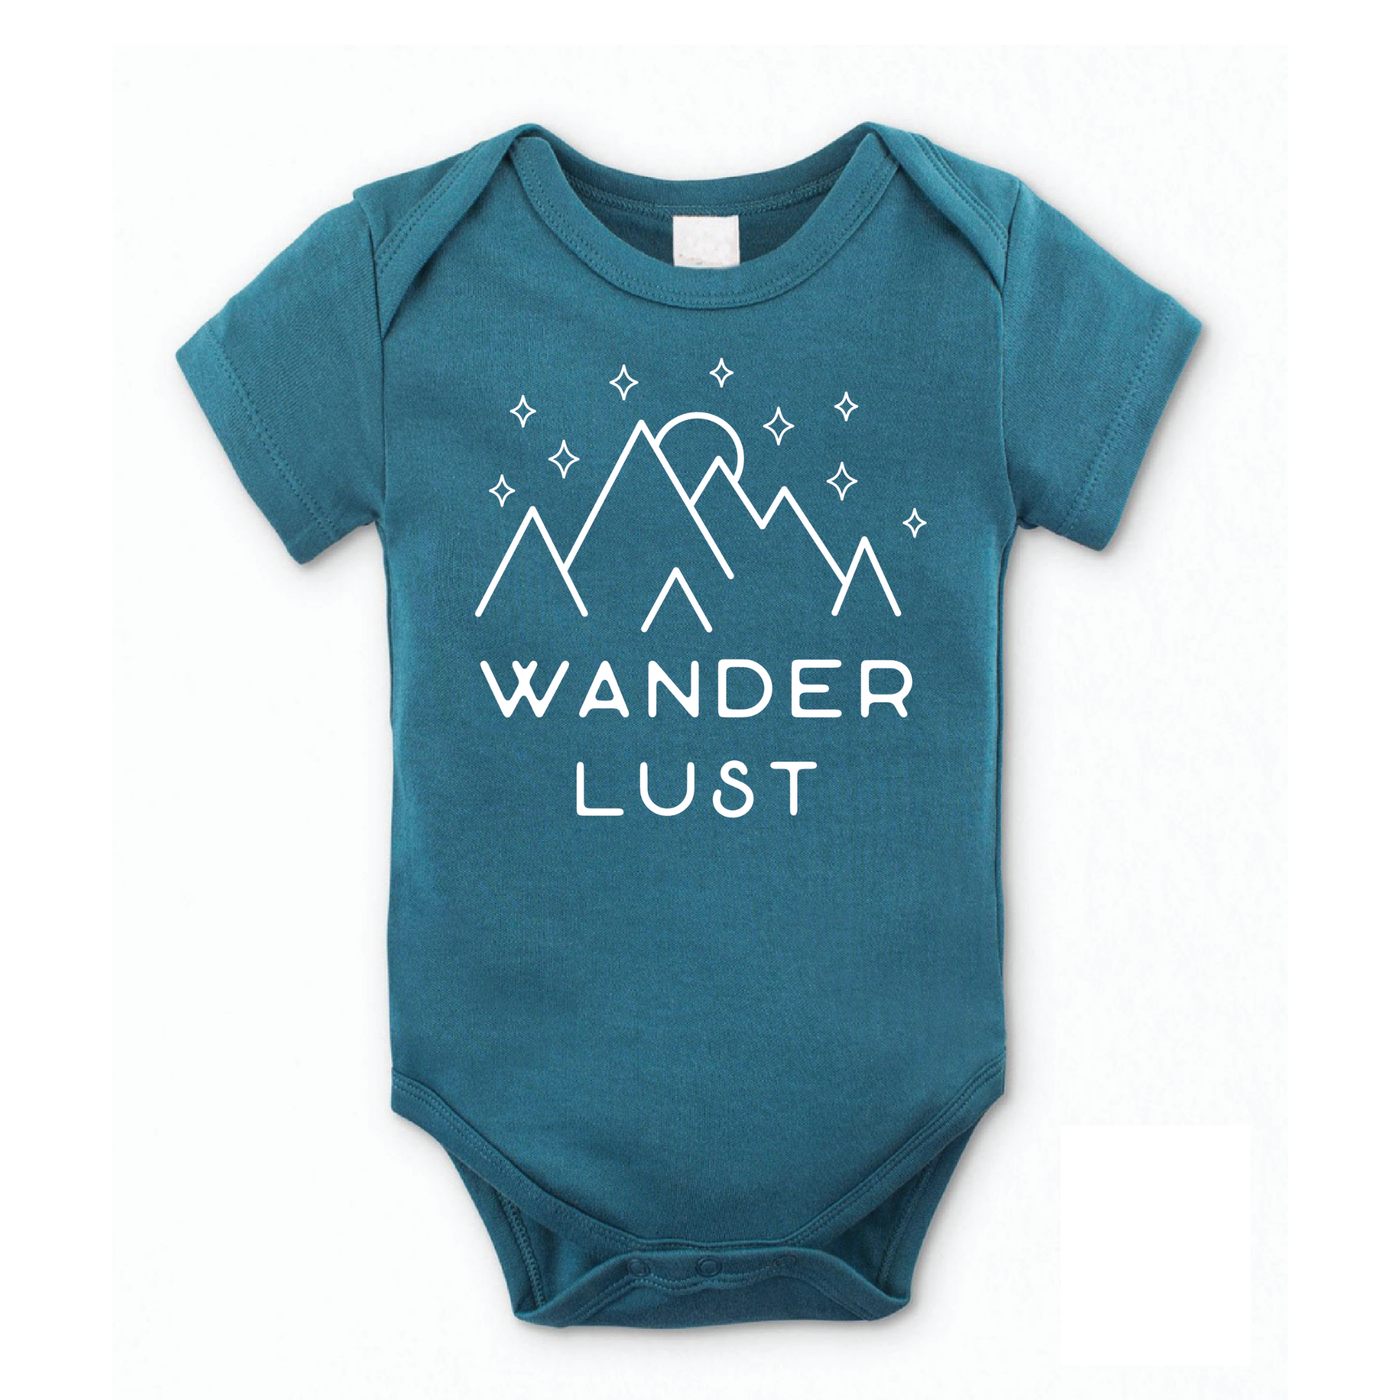 Wanderlust Baby Onesie - The Lake and Company